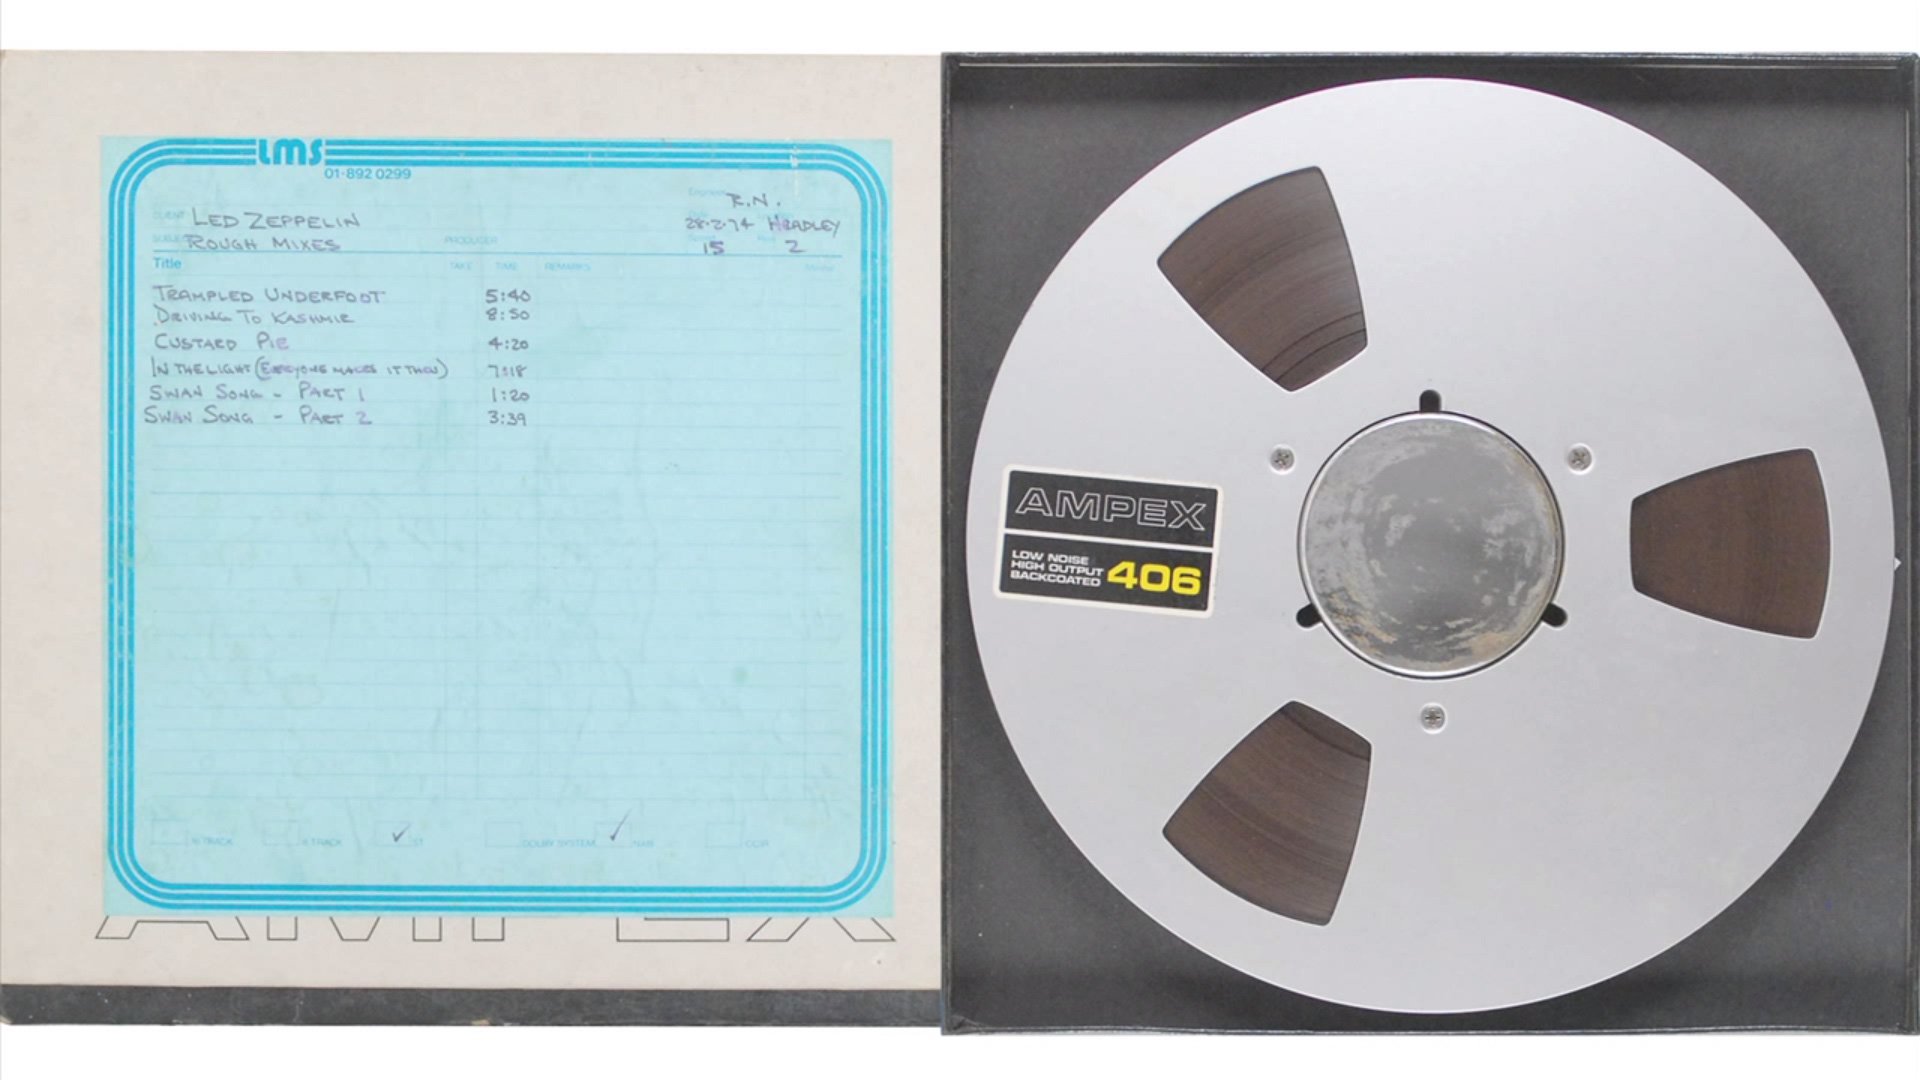 led-zeppelin-session-audio-tape-for-auction